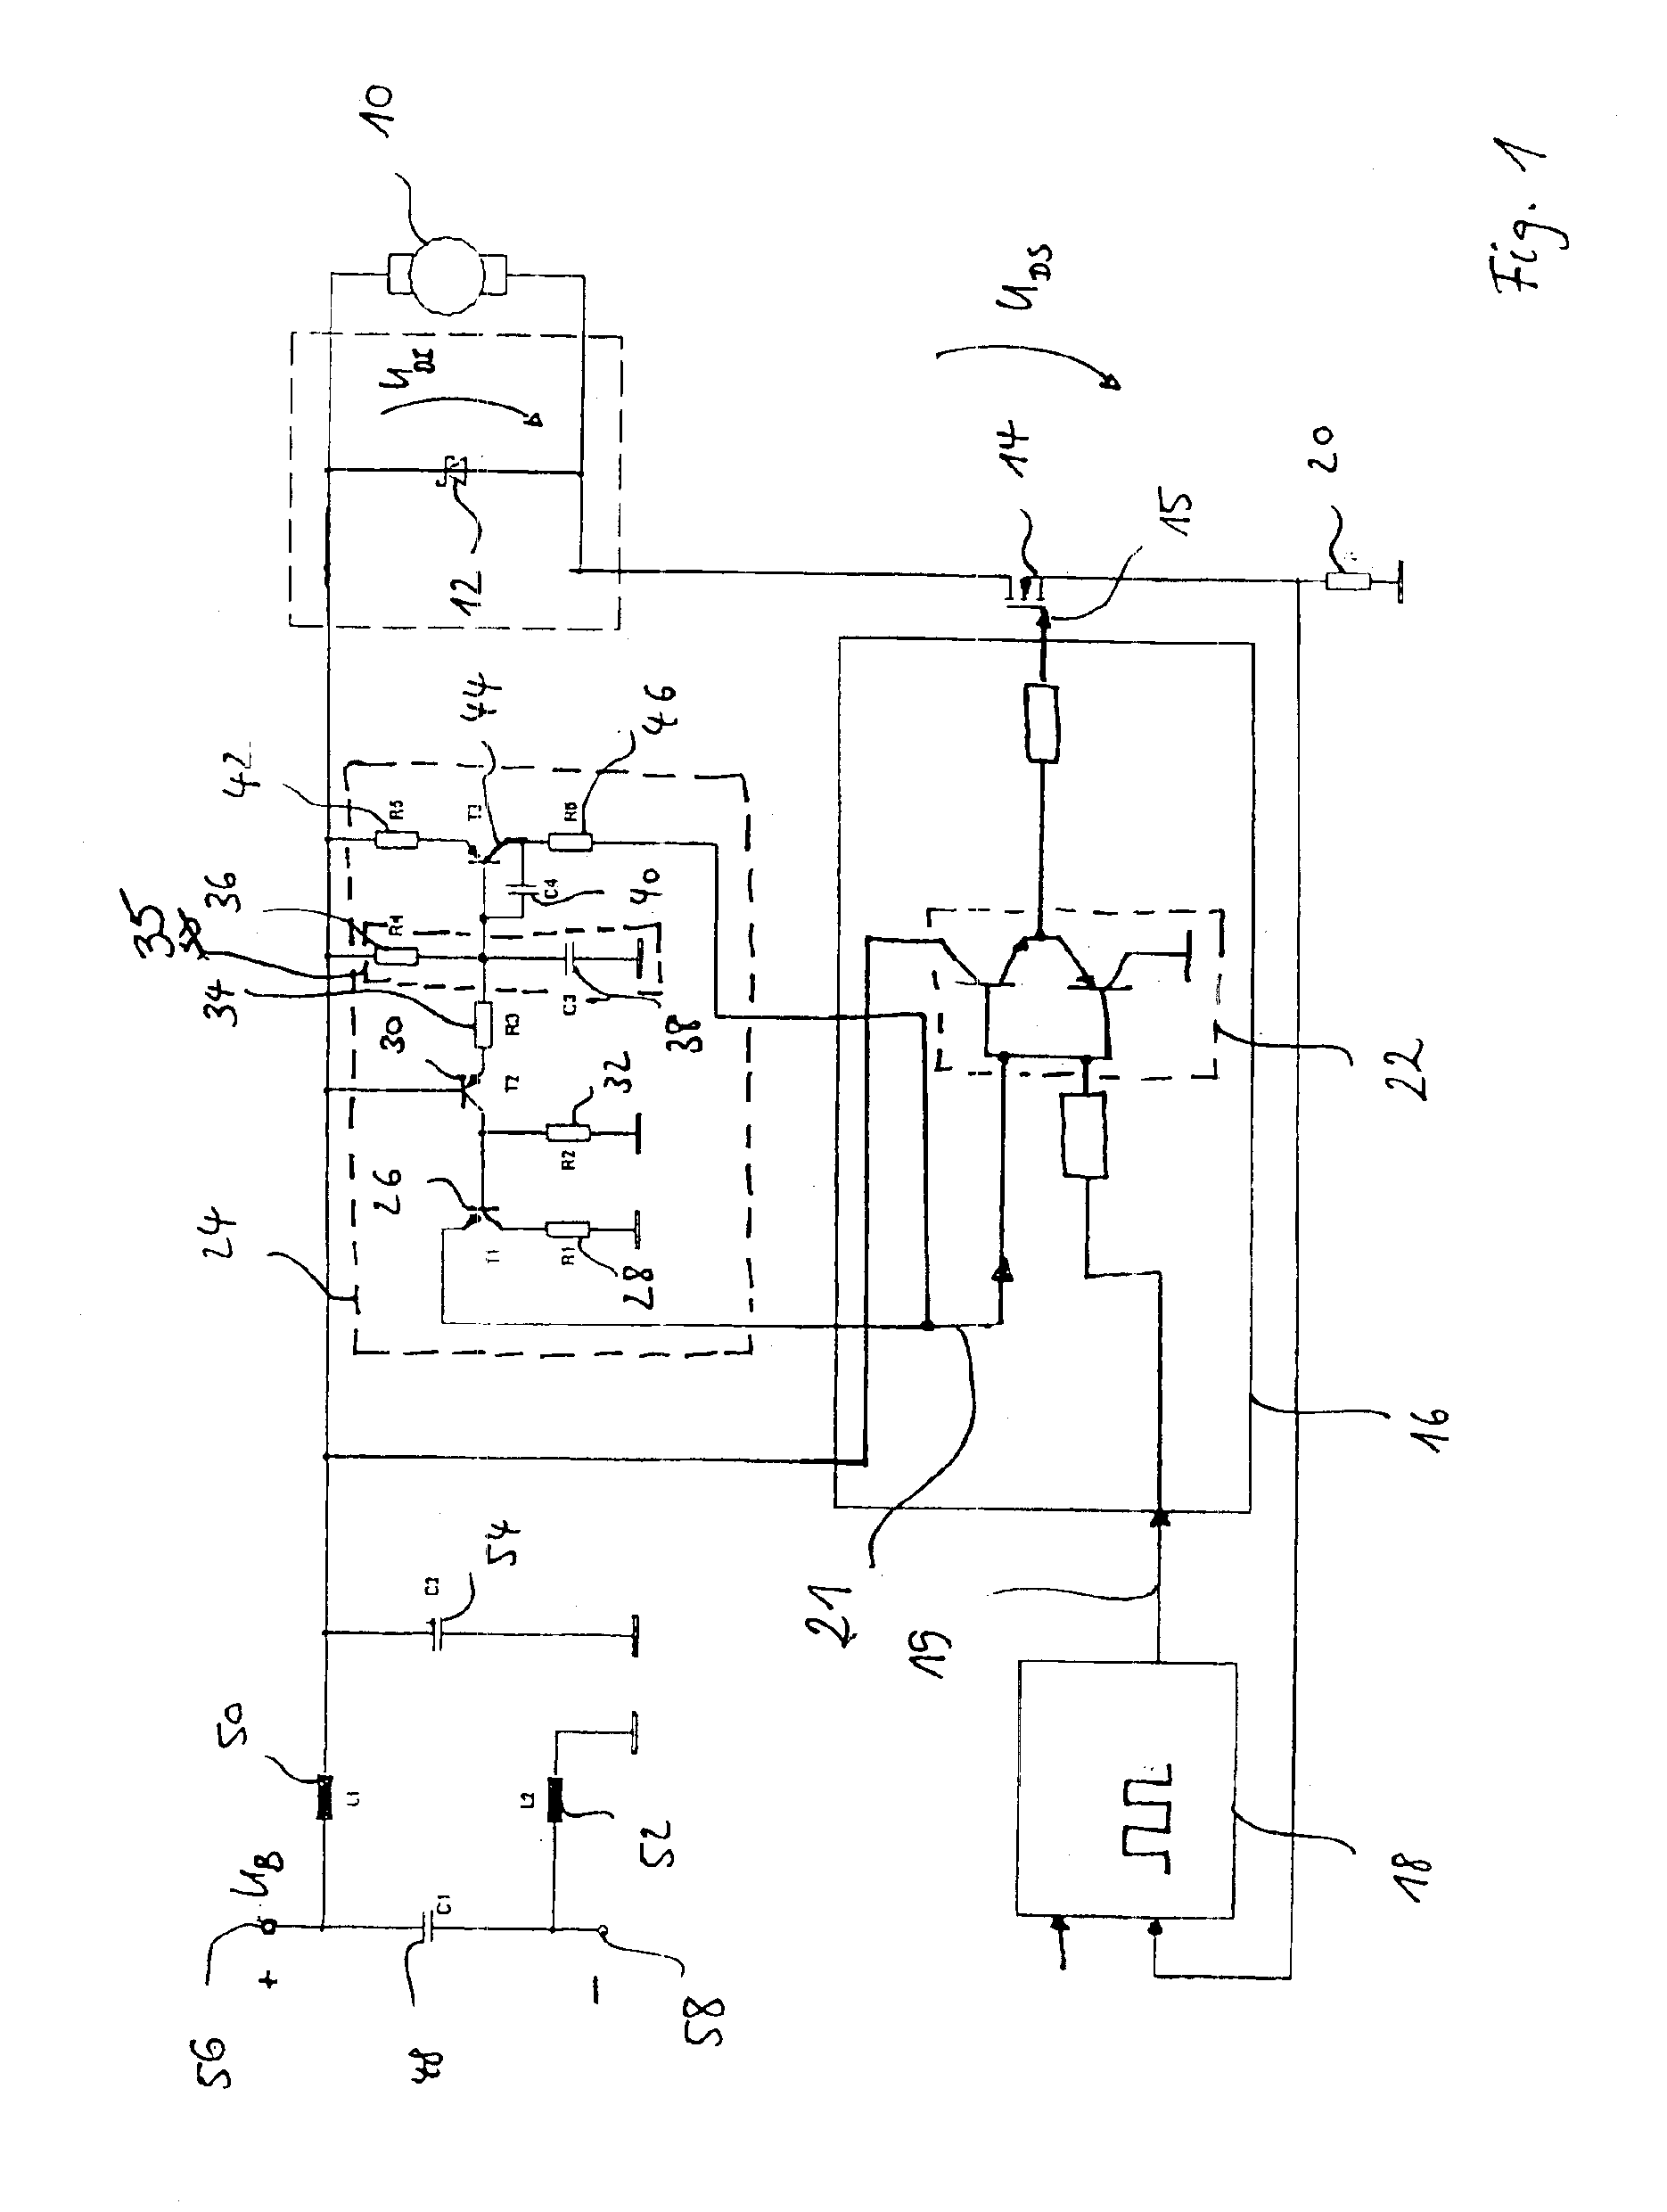 Device for controlling a power output stage